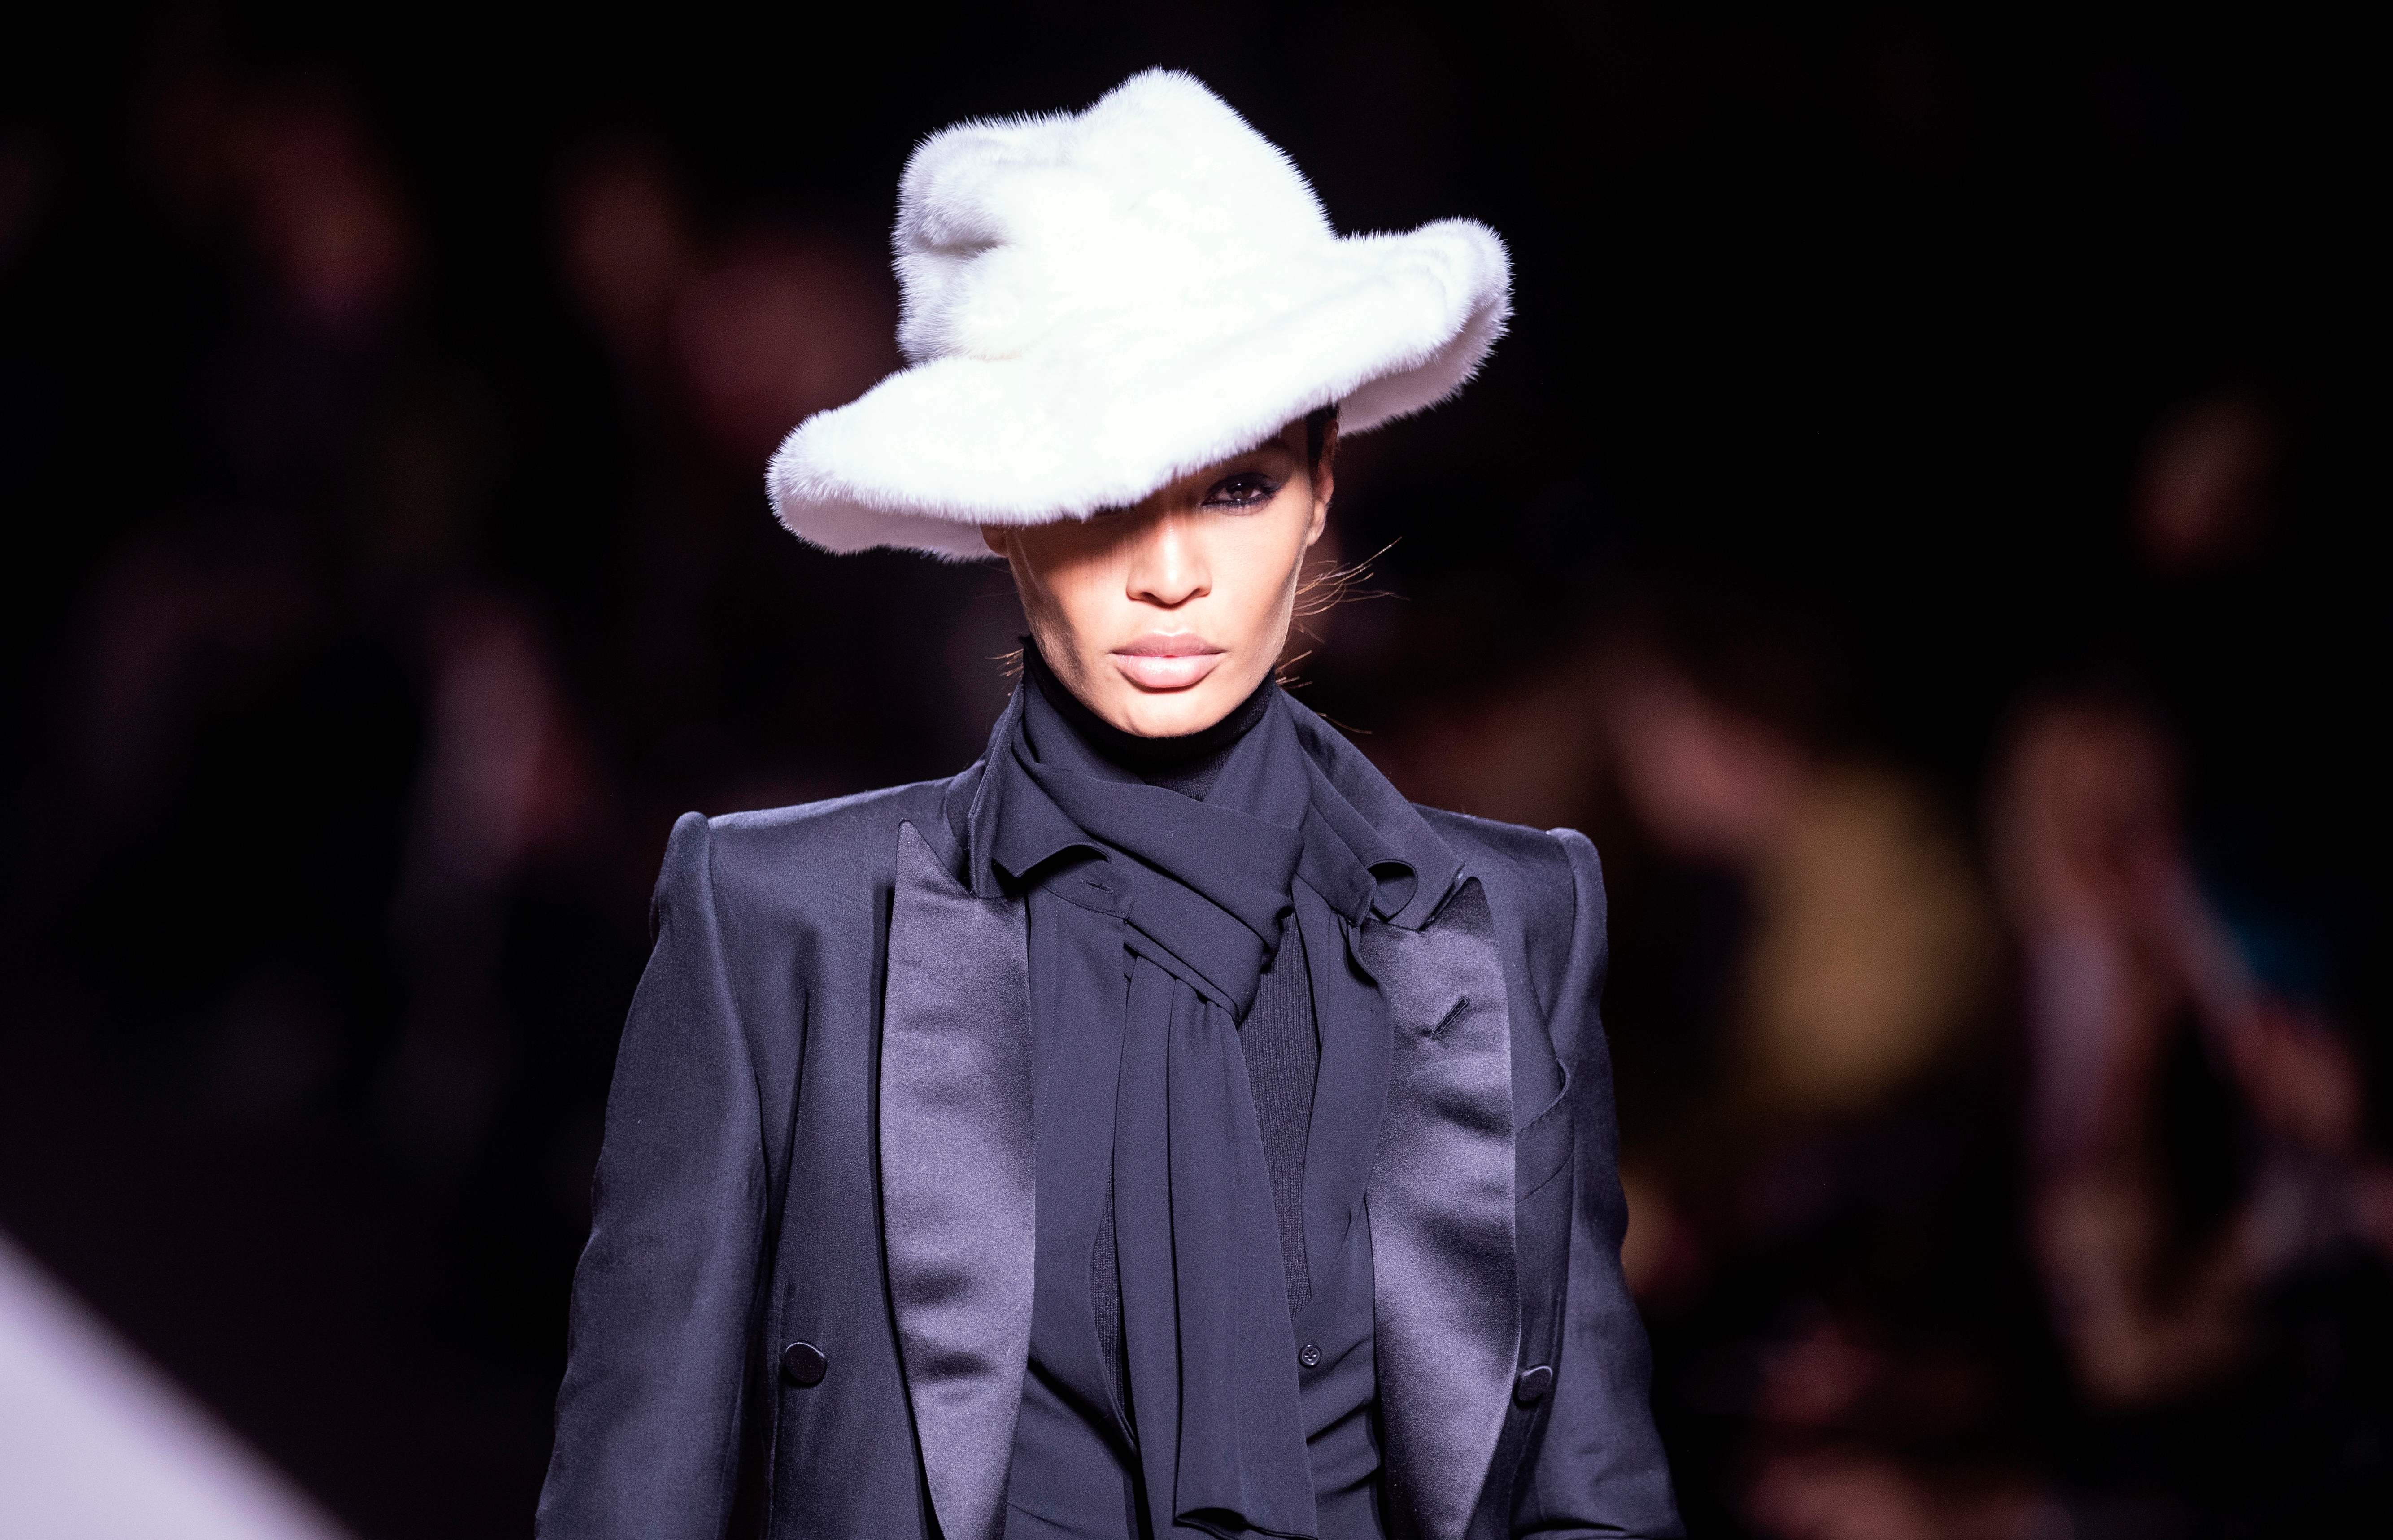 New York Fashion Week: Gigi Hadid walks for Tom Ford but names are scarce South China Post